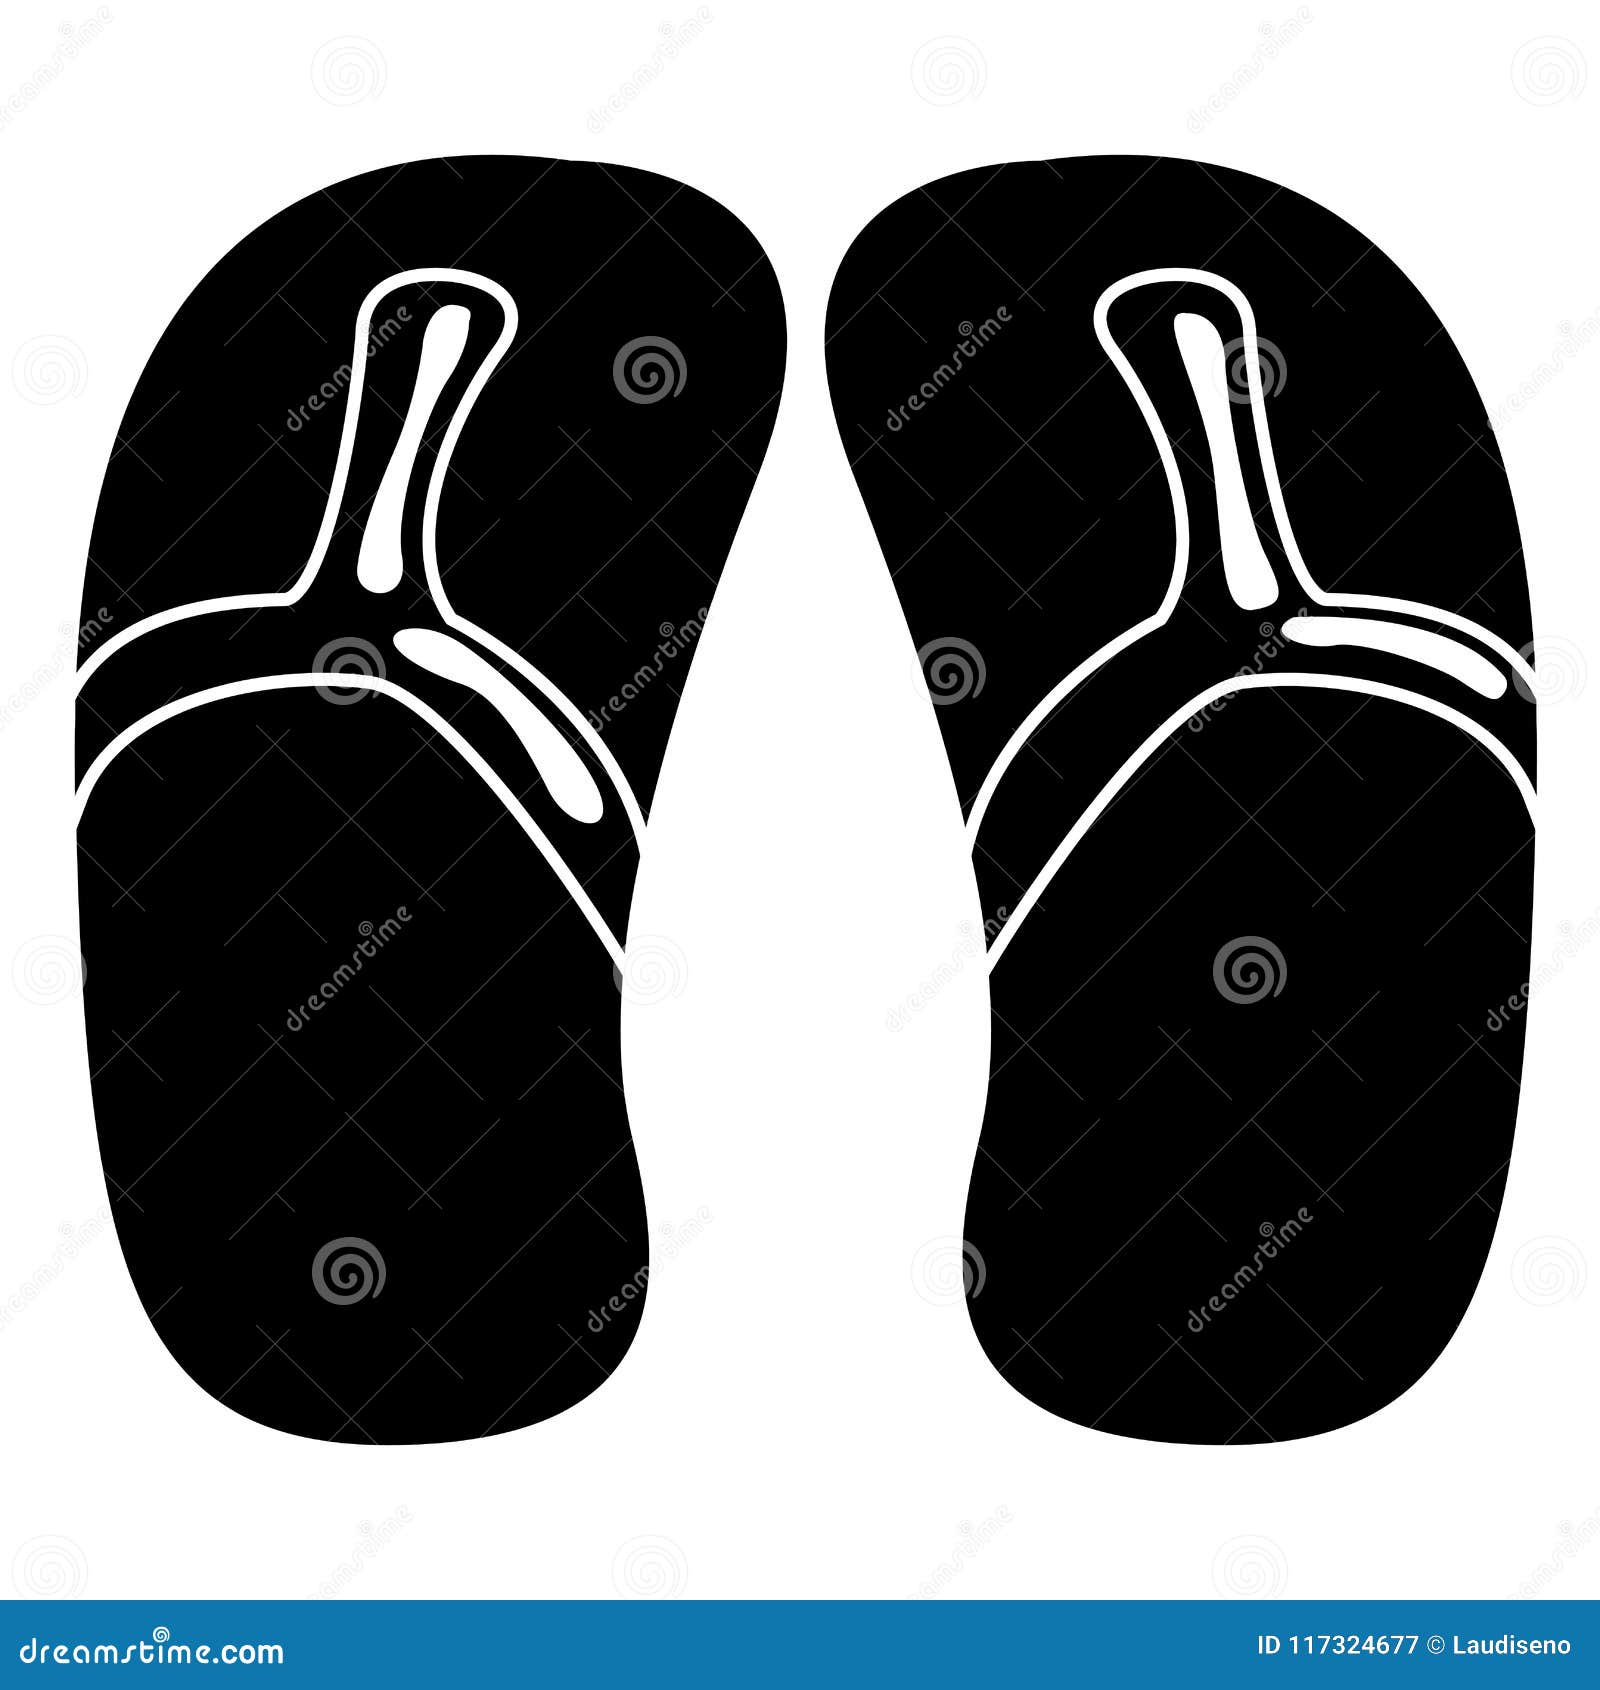 Pair of sandals icon stock vector. Illustration of symbol - 117324677